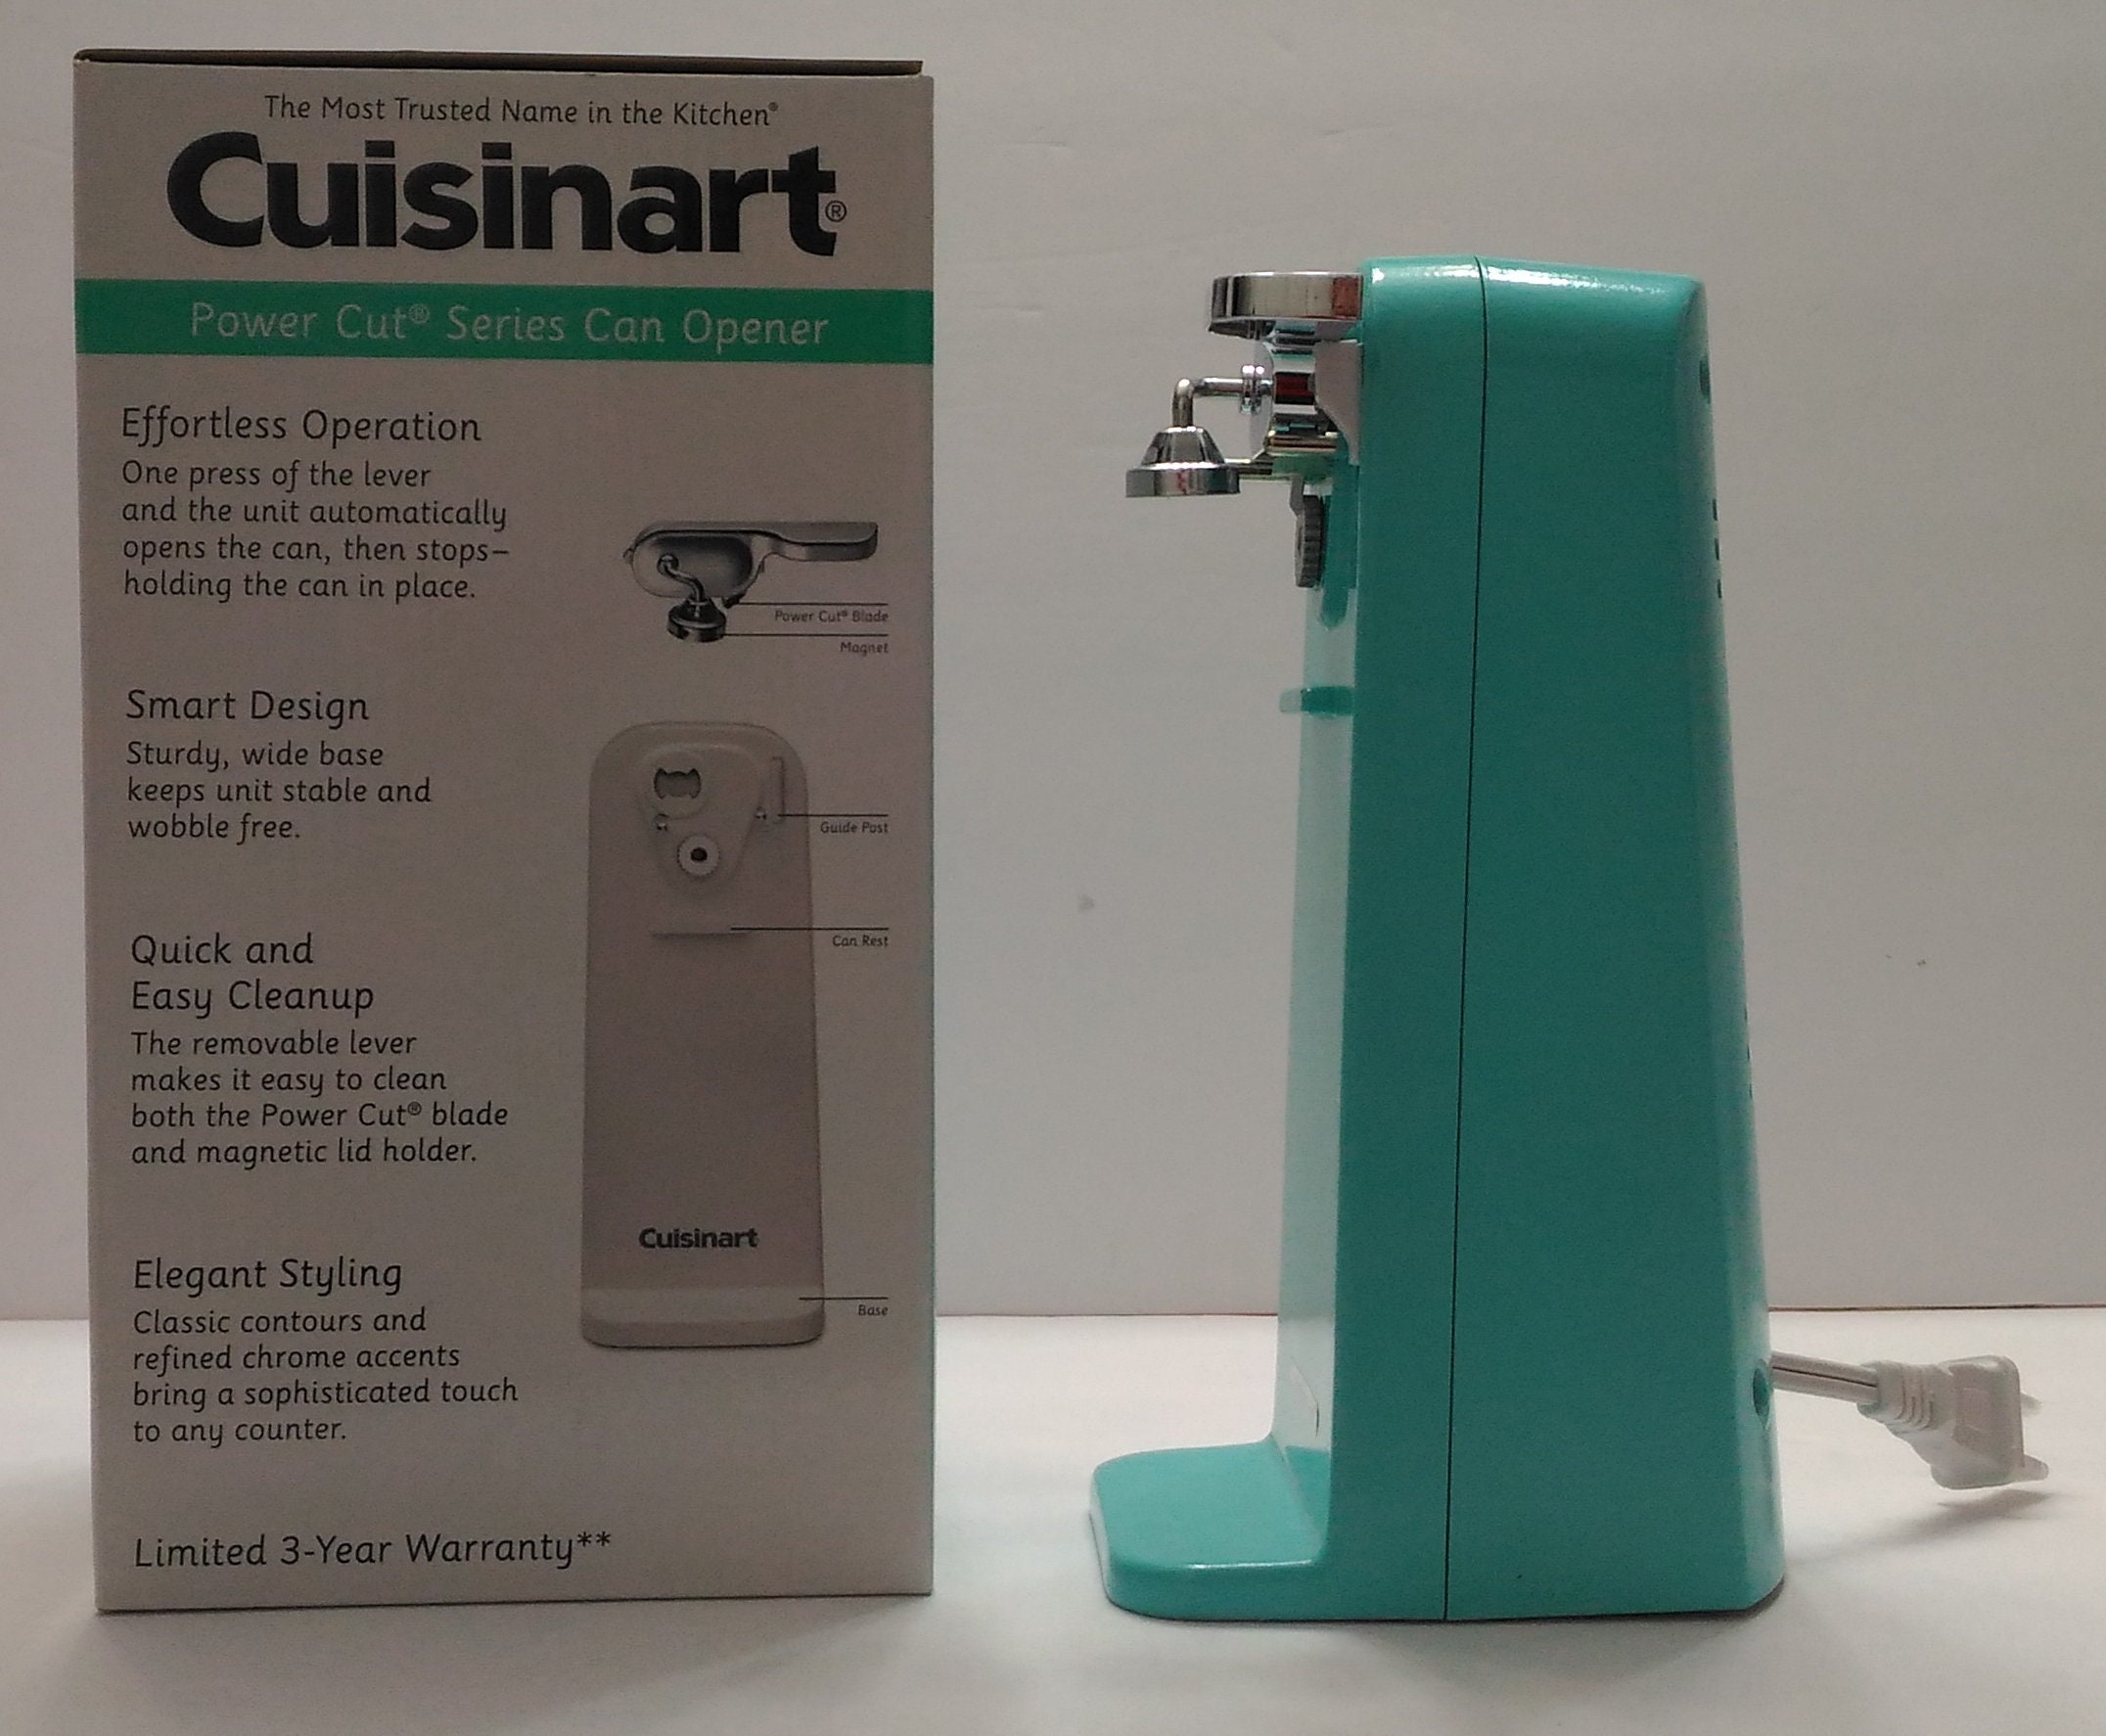 Turquoise Cuisinart Electric Tall Can Opener Turquoise -  Norway